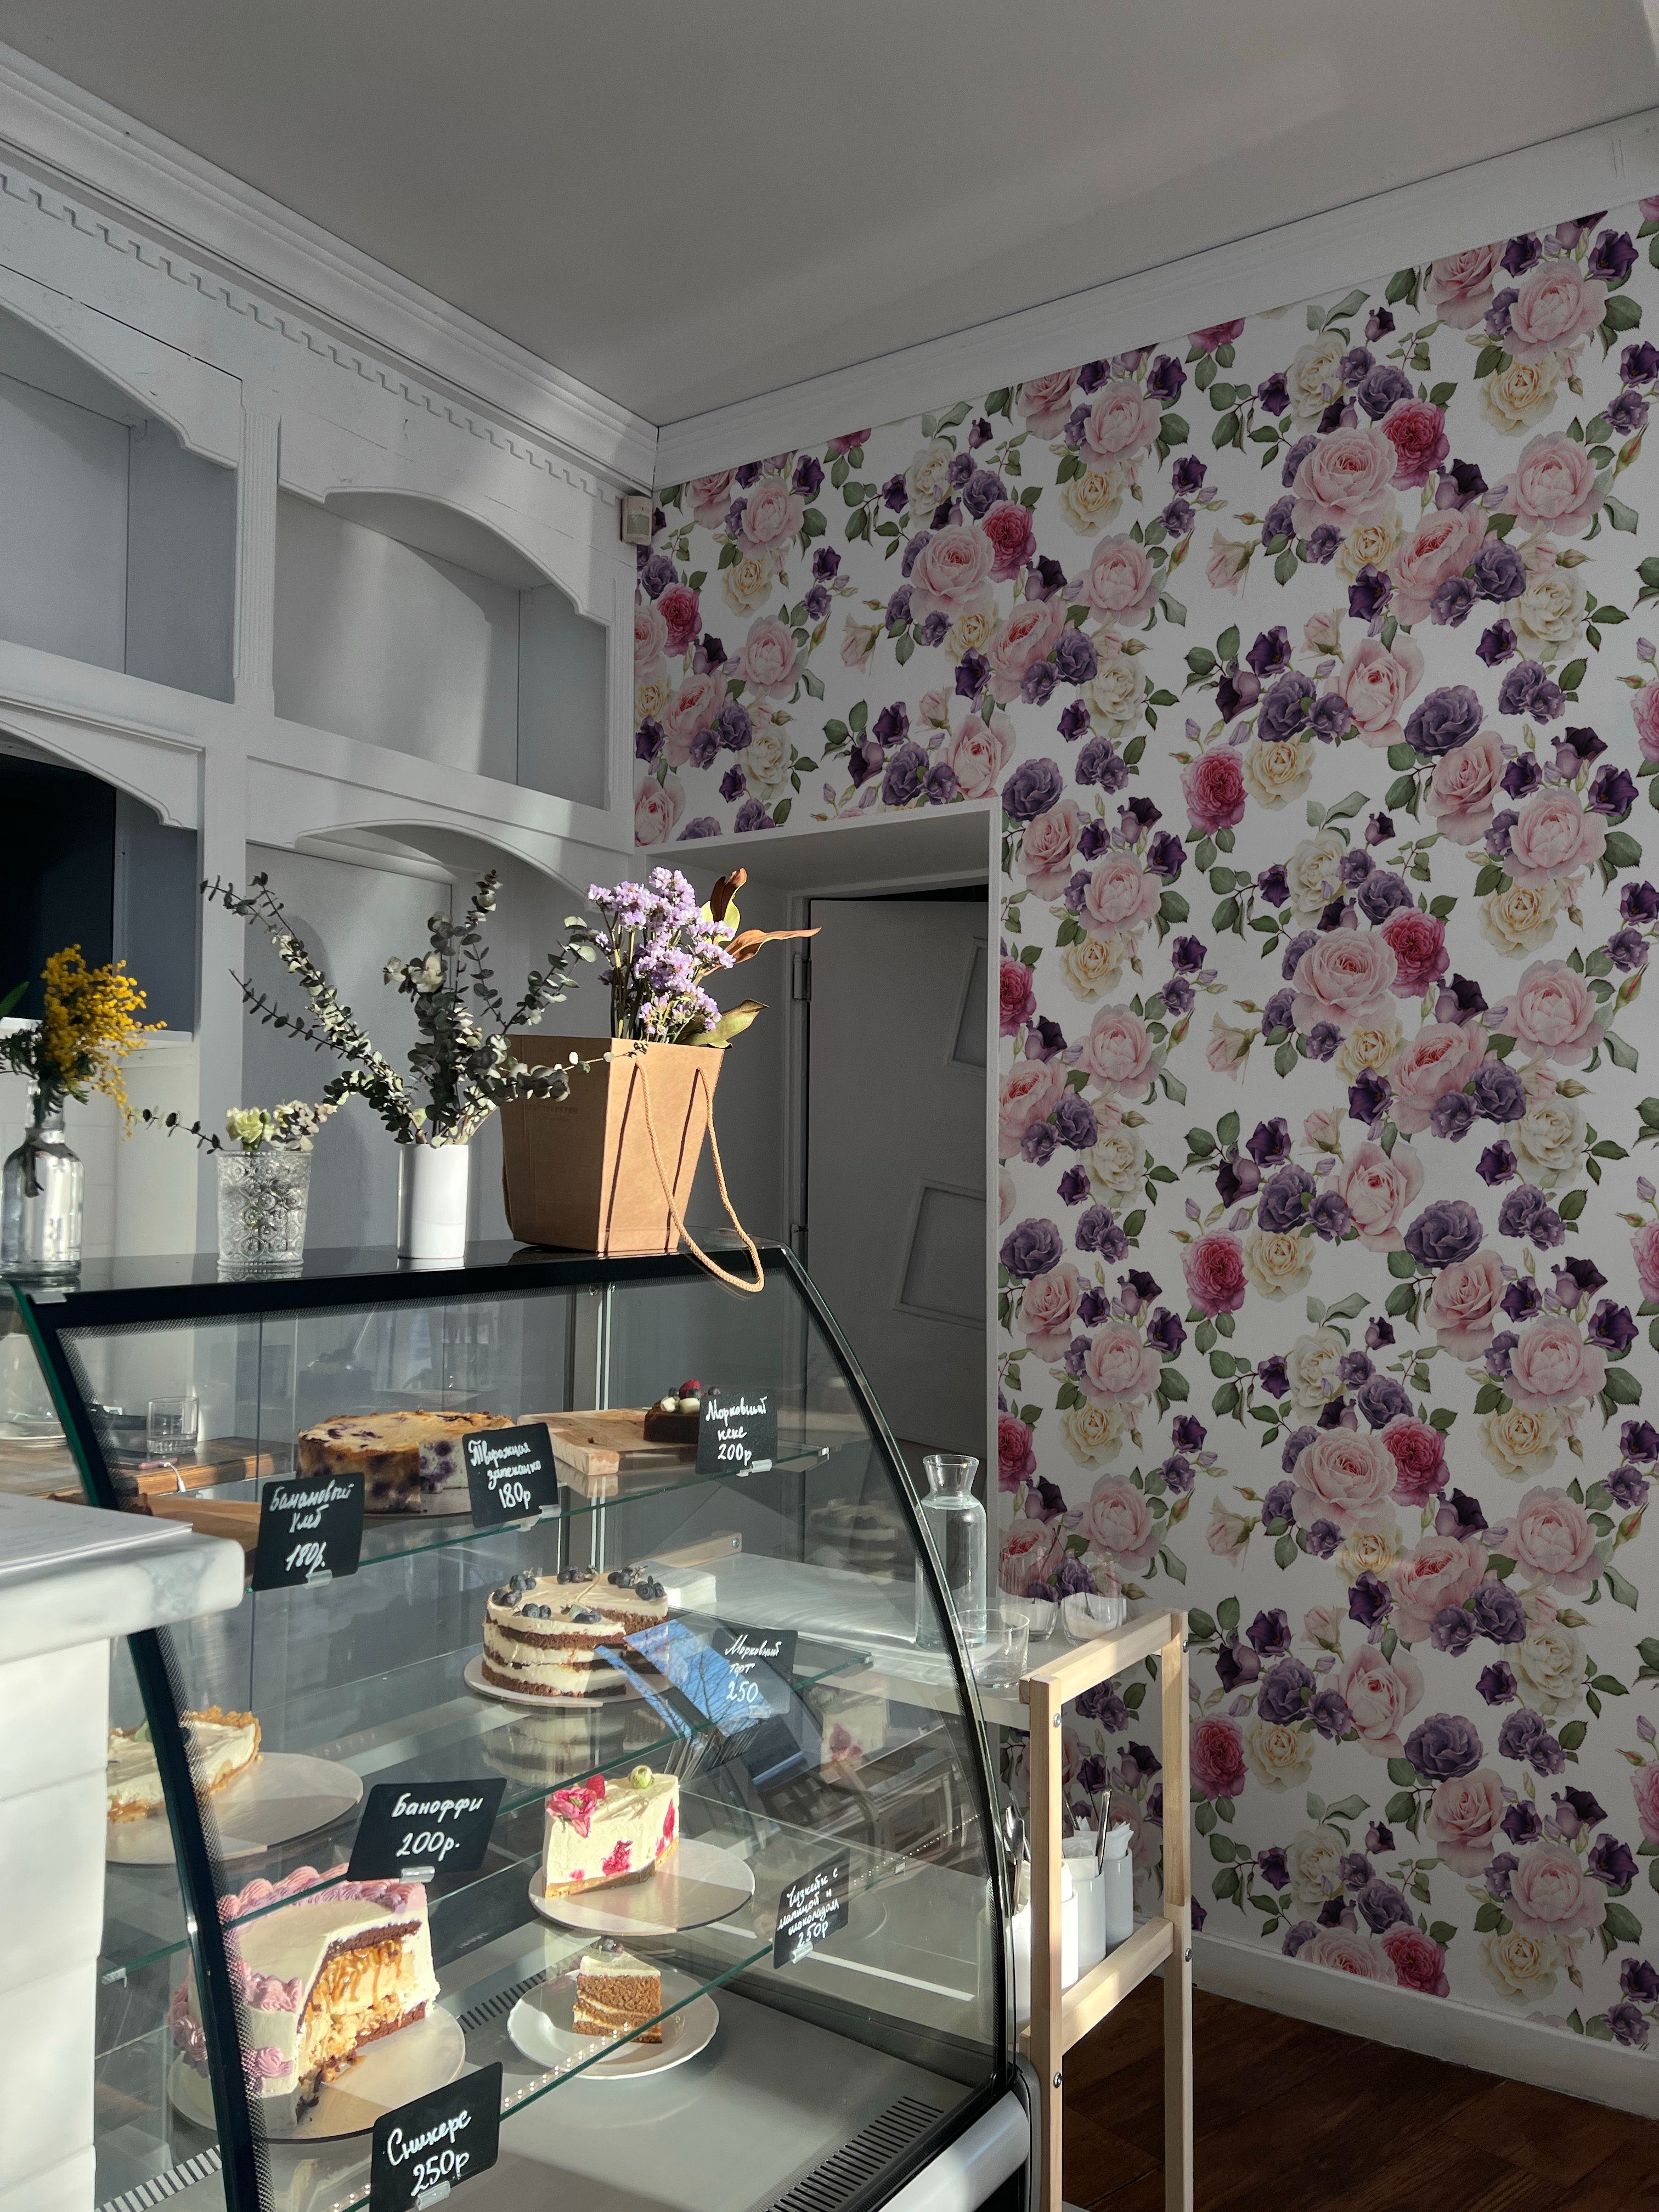 A charming cafe interior showcasing Mahalia Rose Floral Wallpaper, adorned with a lush pattern of pink and purple roses. The floral wall serves as a vivid backdrop to a display case filled with delectable cakes and pastries, creating a welcoming and stylish ambiance